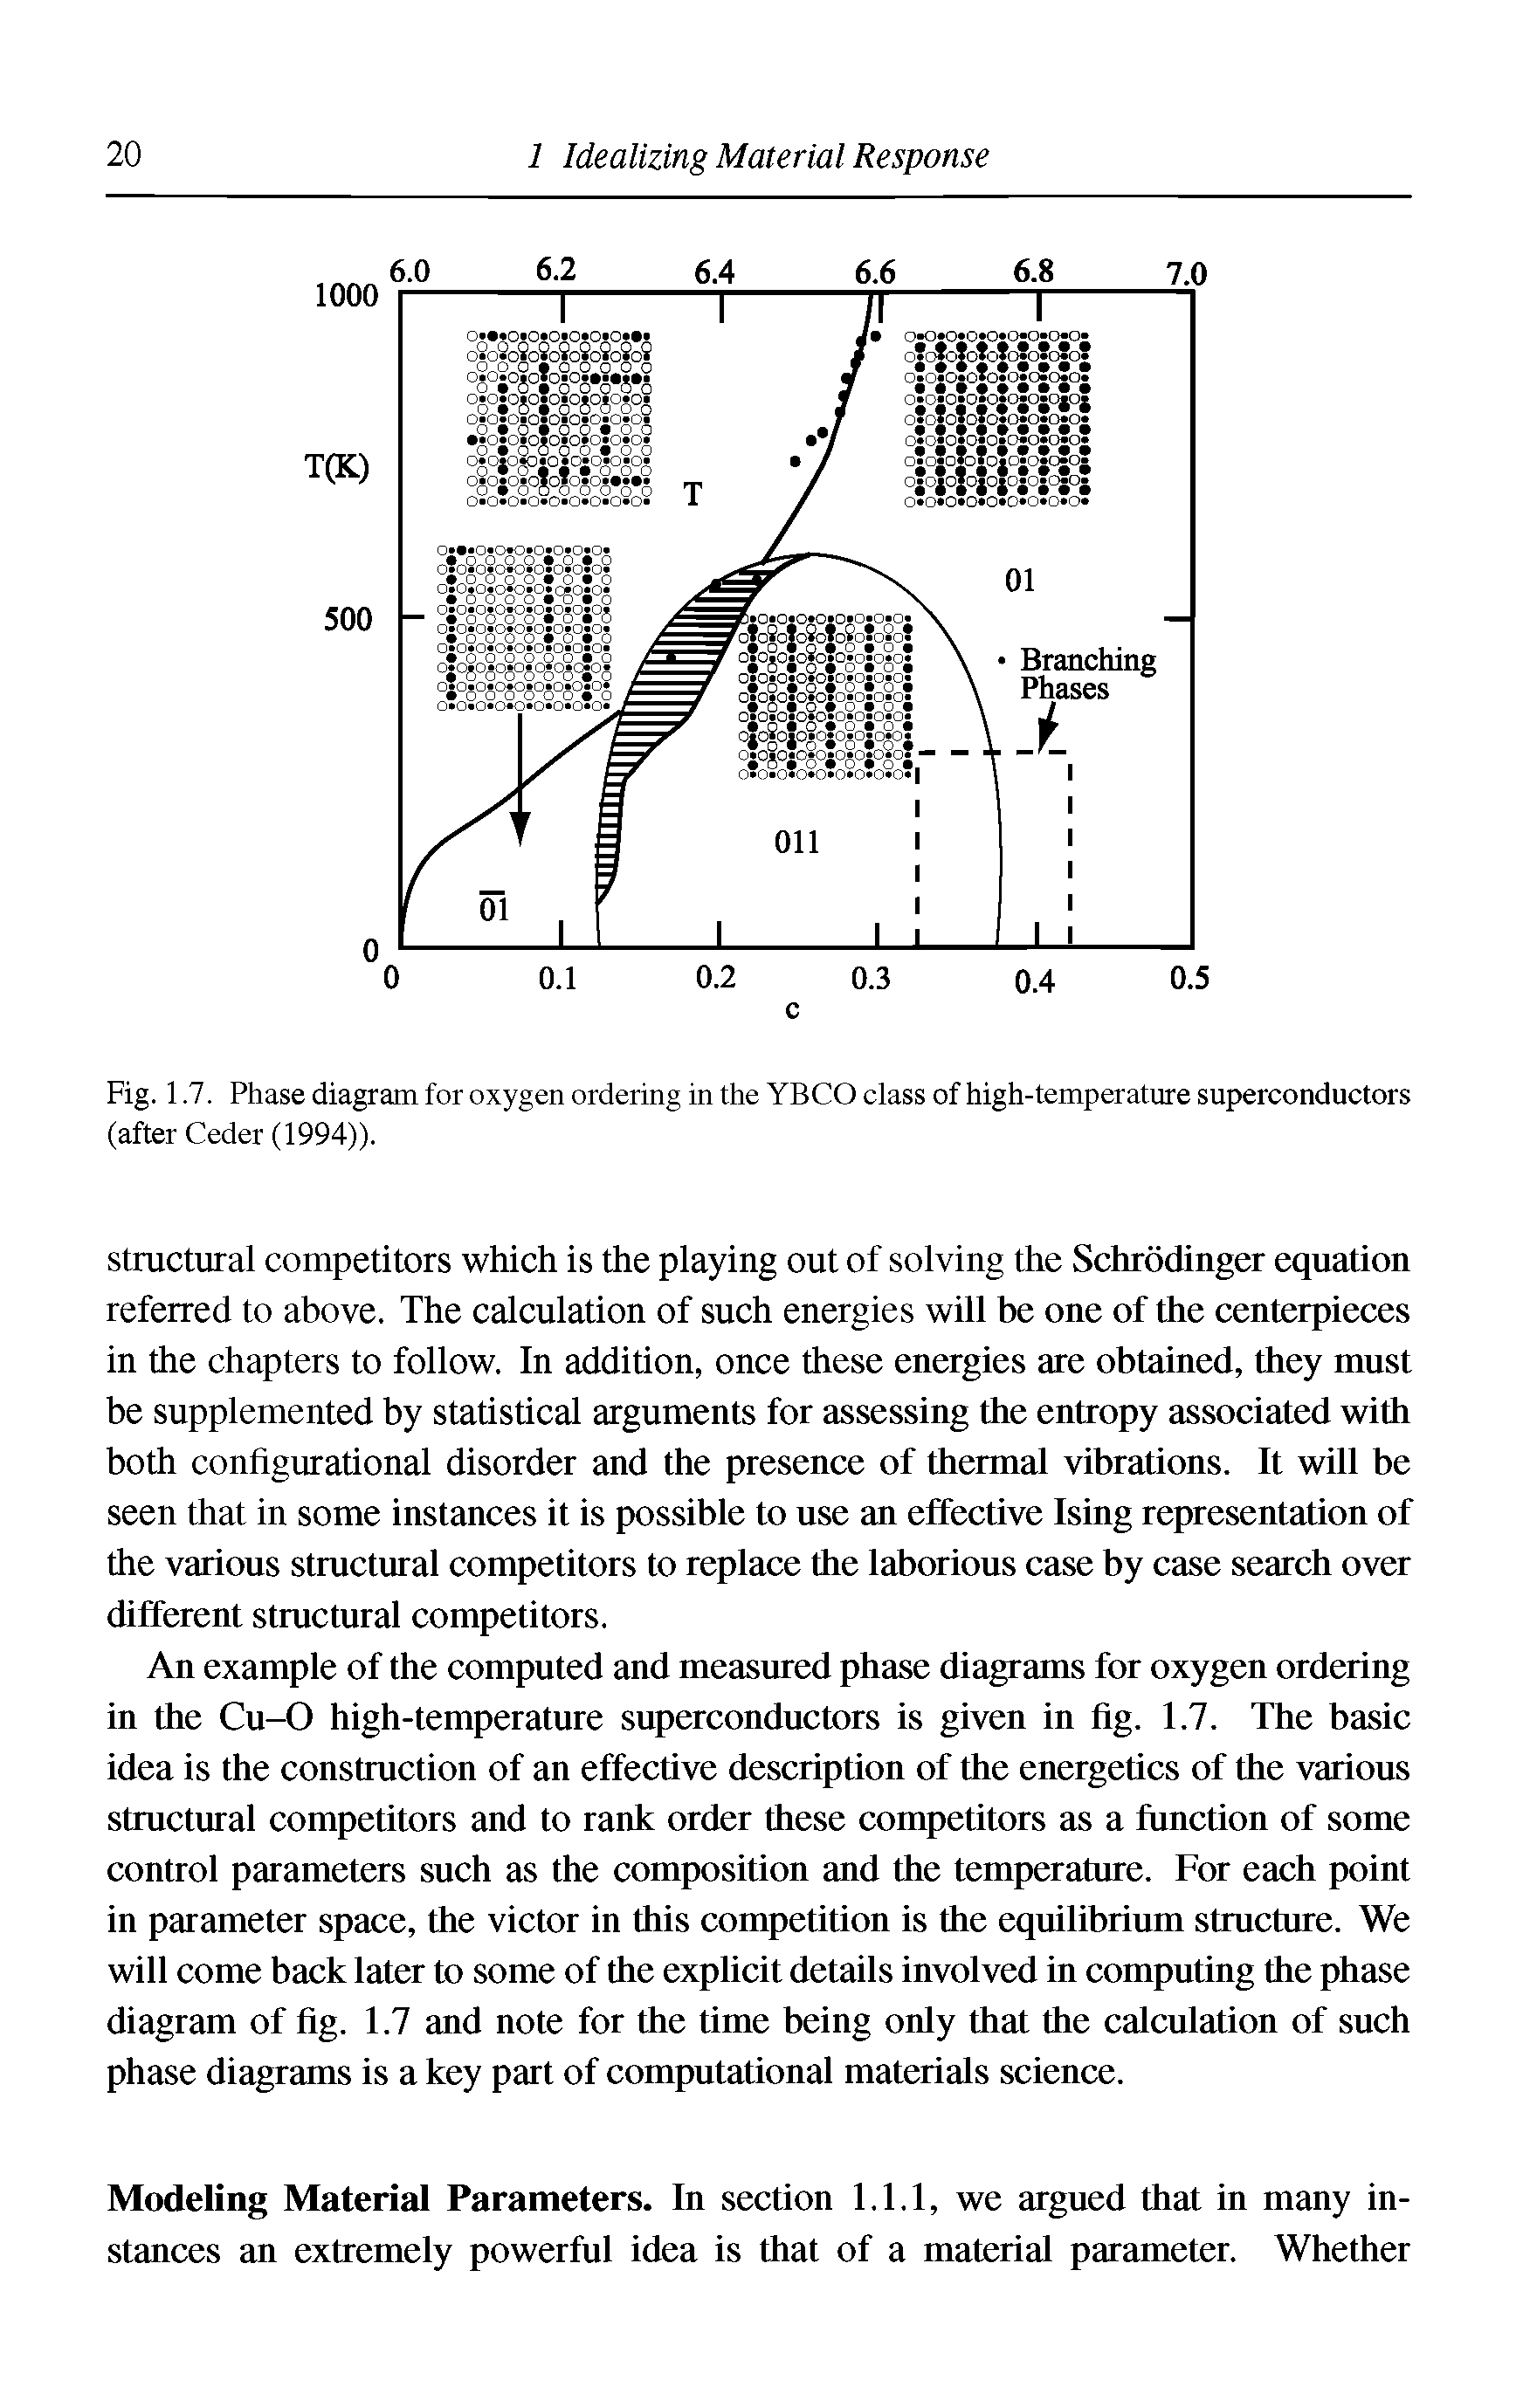 Fig. 1.7. Phase diagram for oxygen ordering in the YBCO class of high-temperature superconductors (after Ceder (1994)).